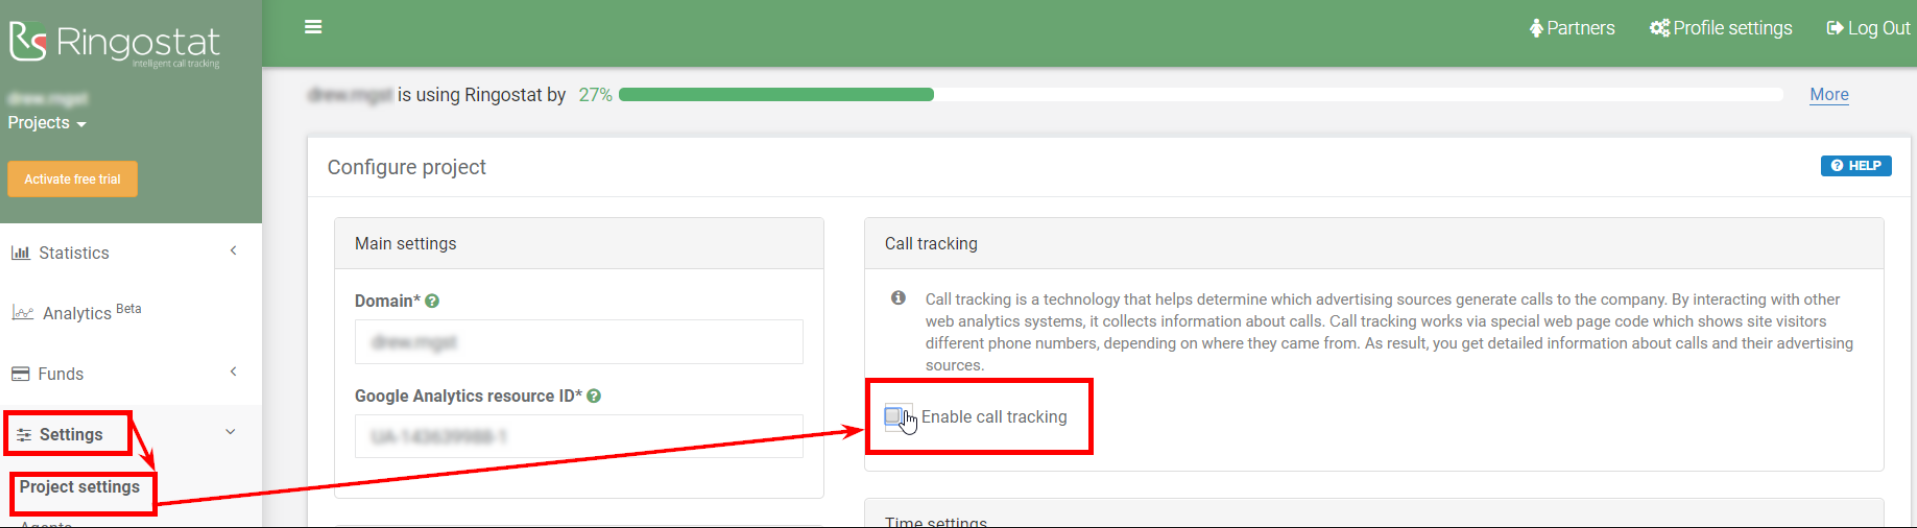 How to enable call tracking in Ringostat